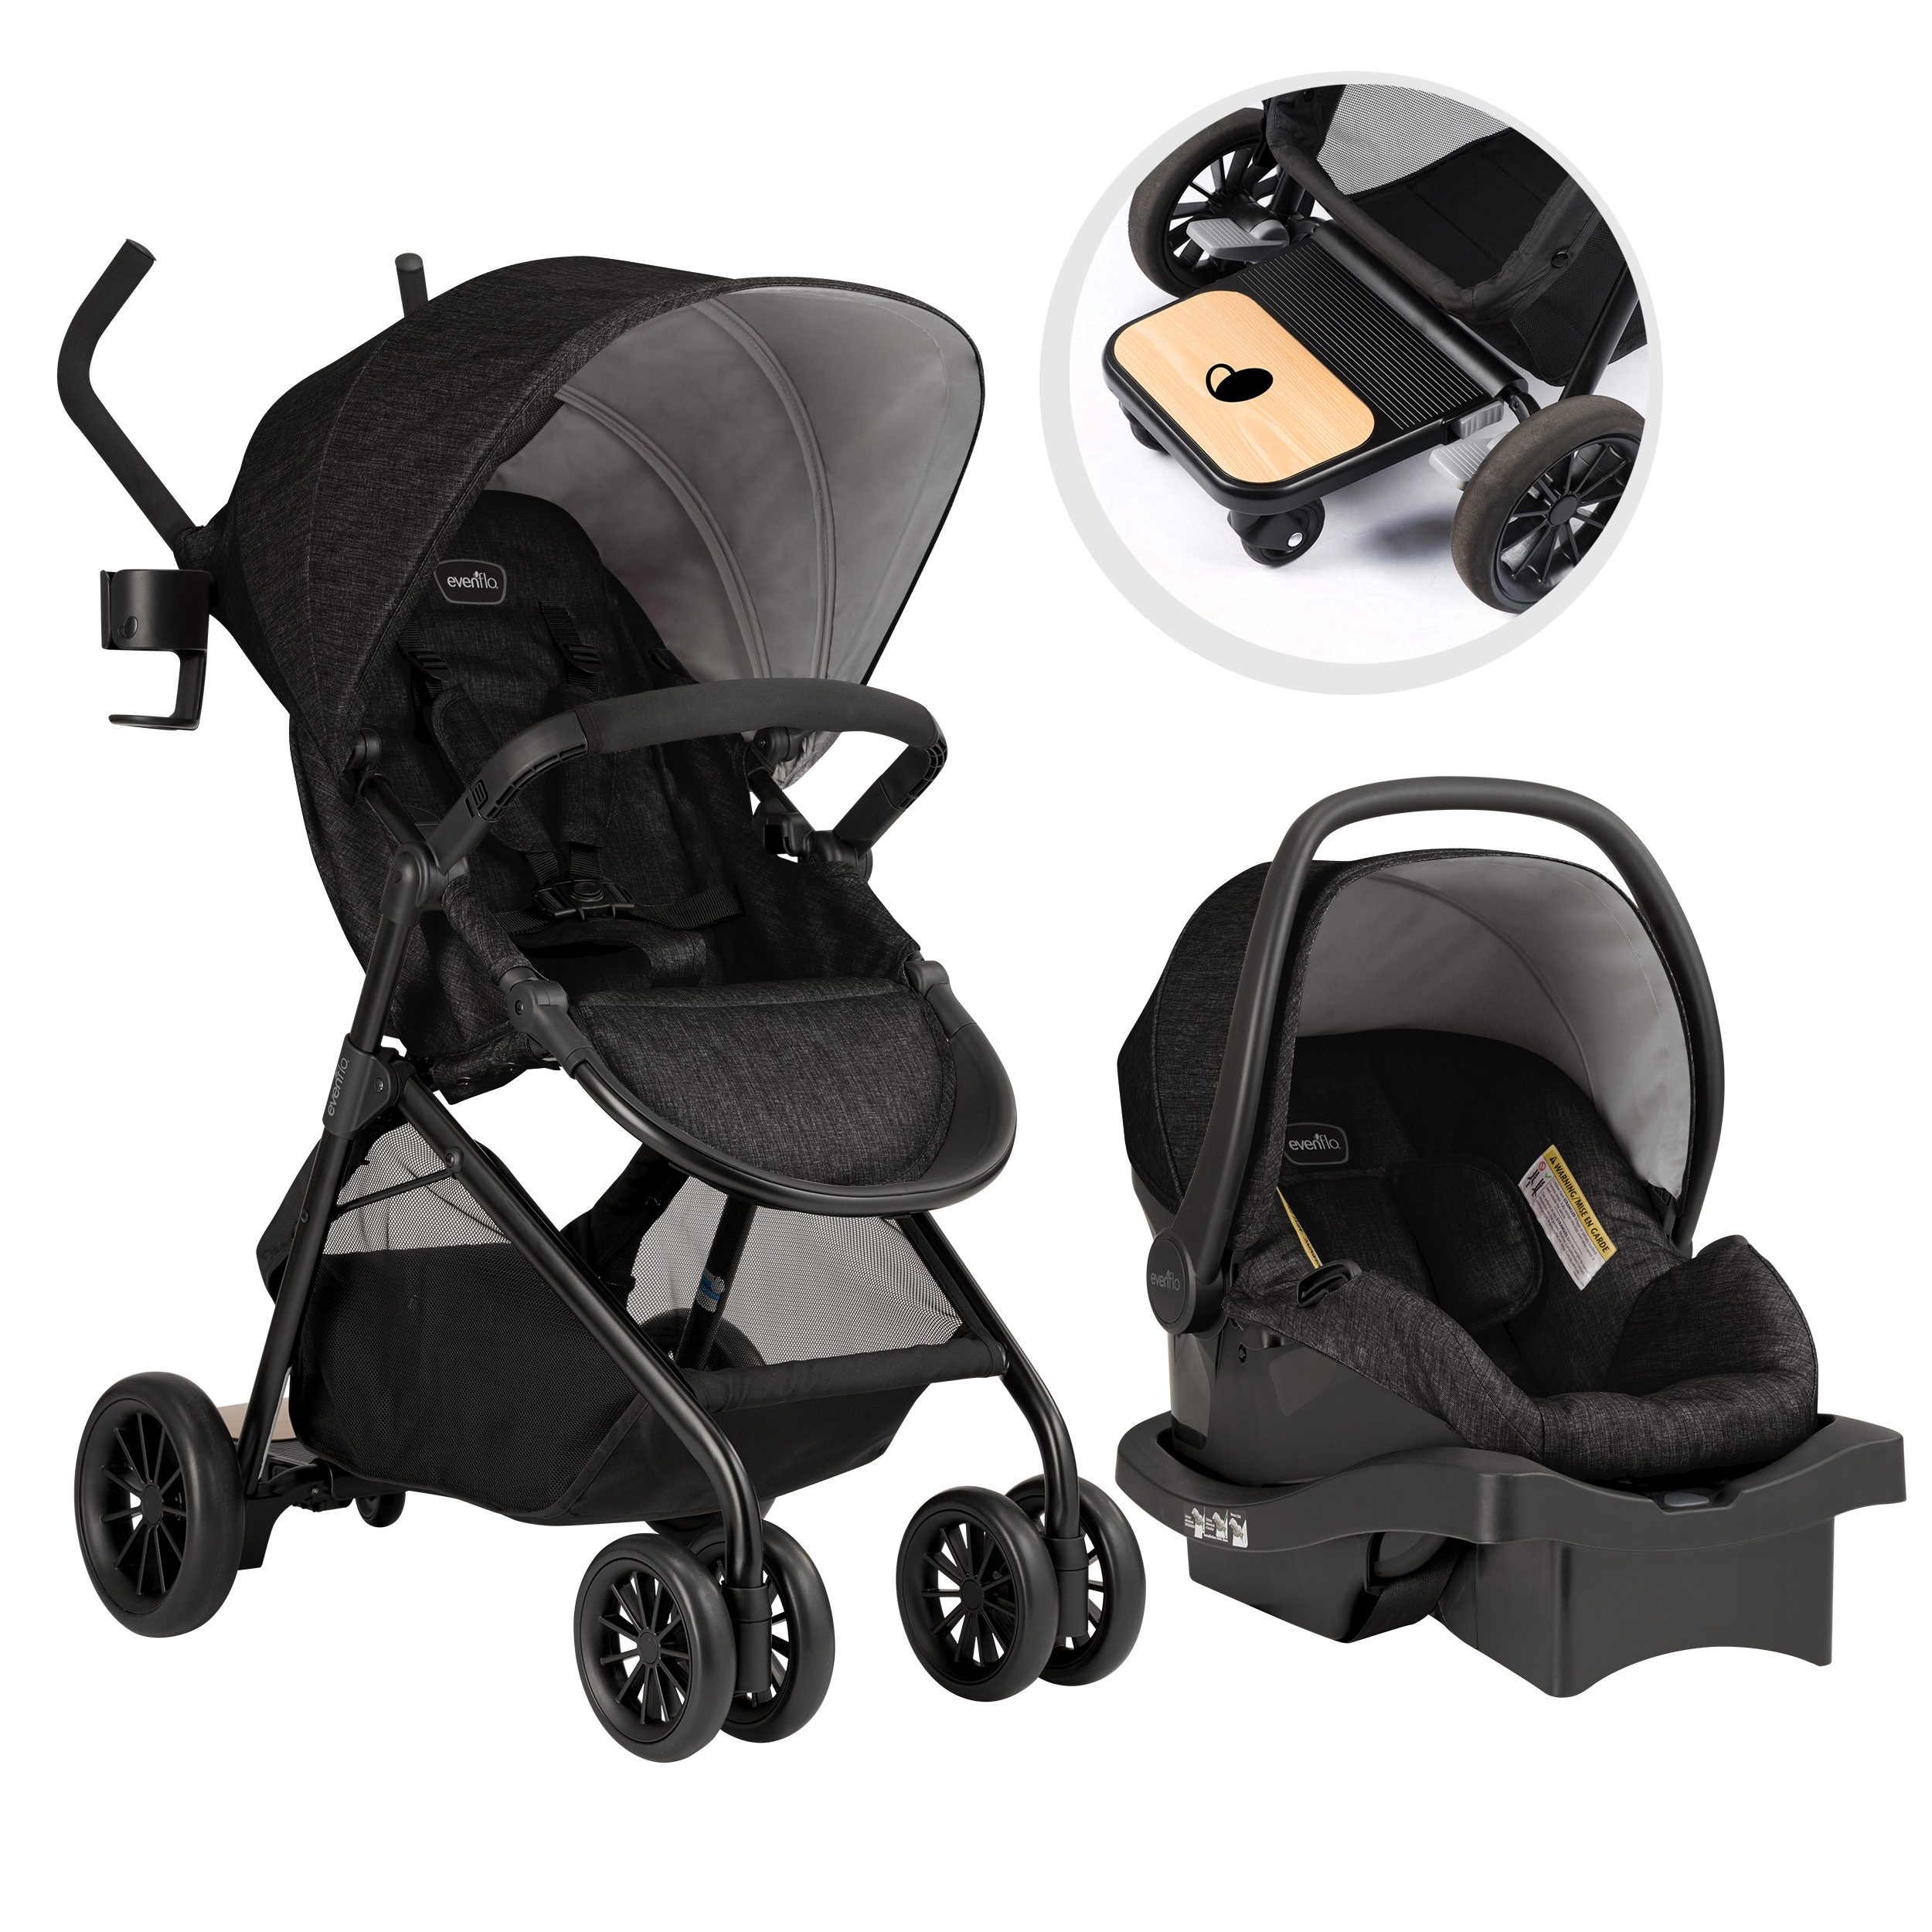 Evenflo Sibby Travel System Stroller, Solid Print Gray Black - image 1 of 24